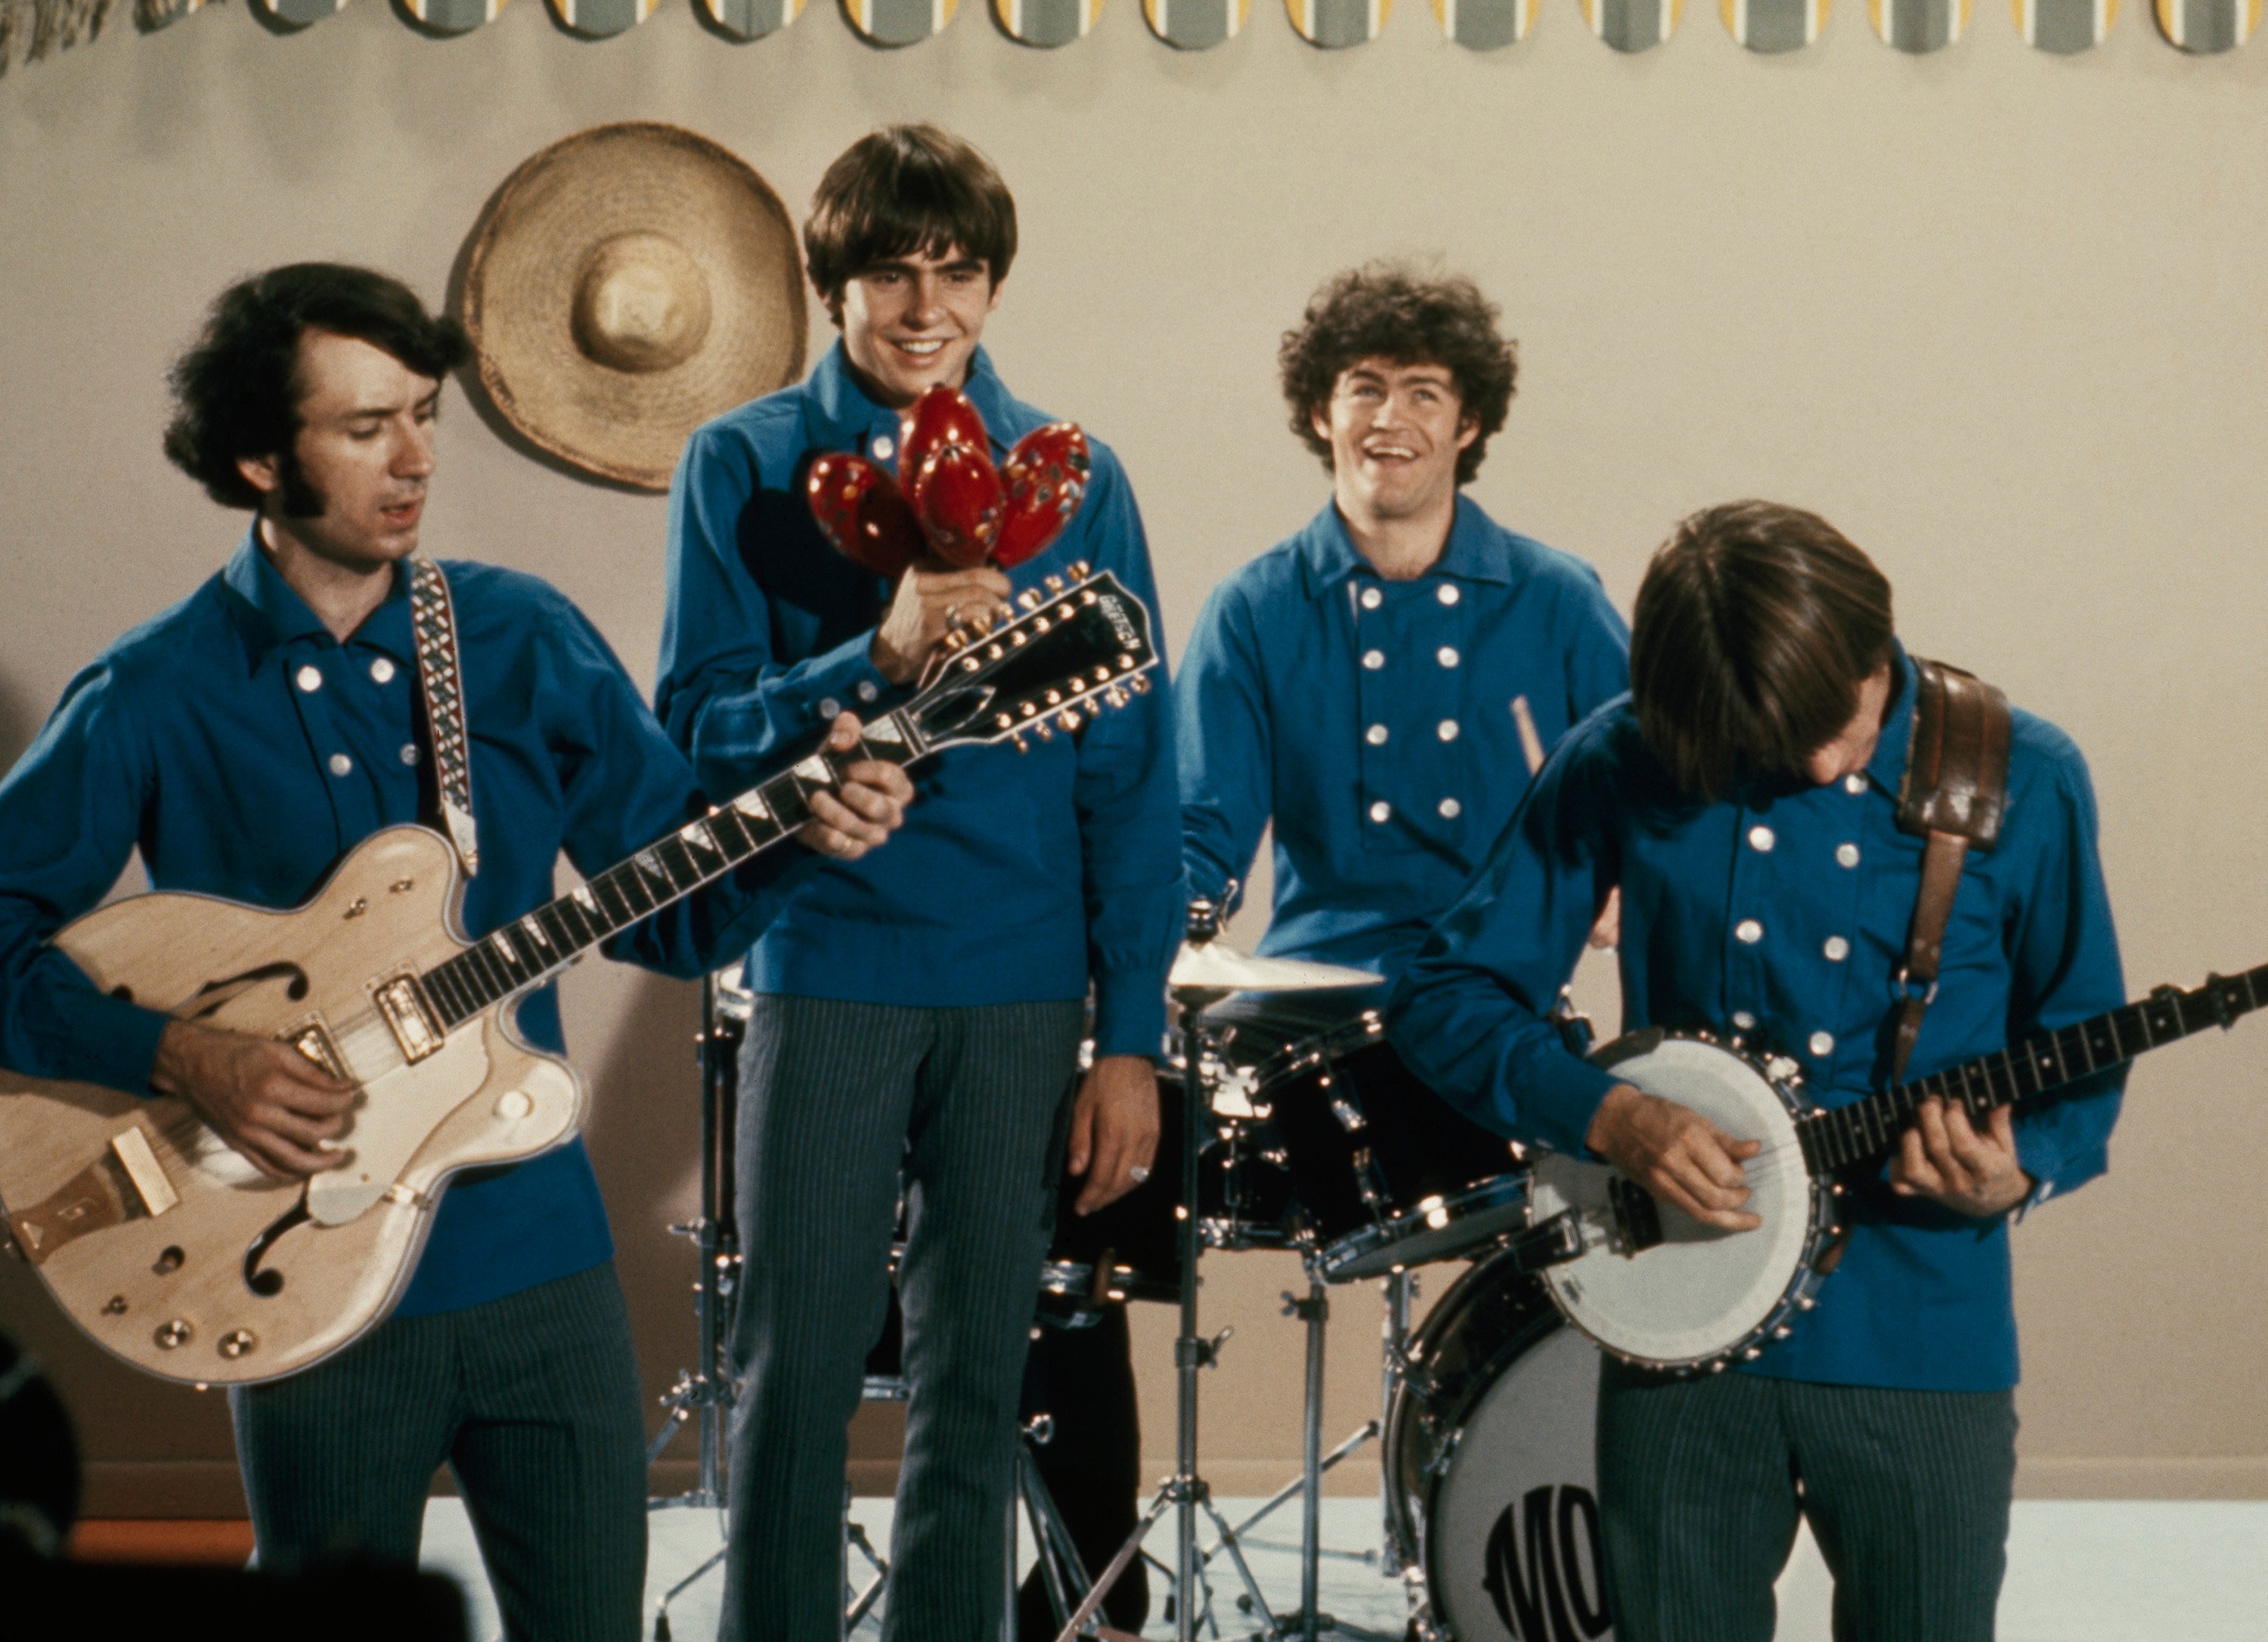 The Monkees' Michael Nesmith, Davy Jones, Micky Dolenz, Peter Tork playing songs